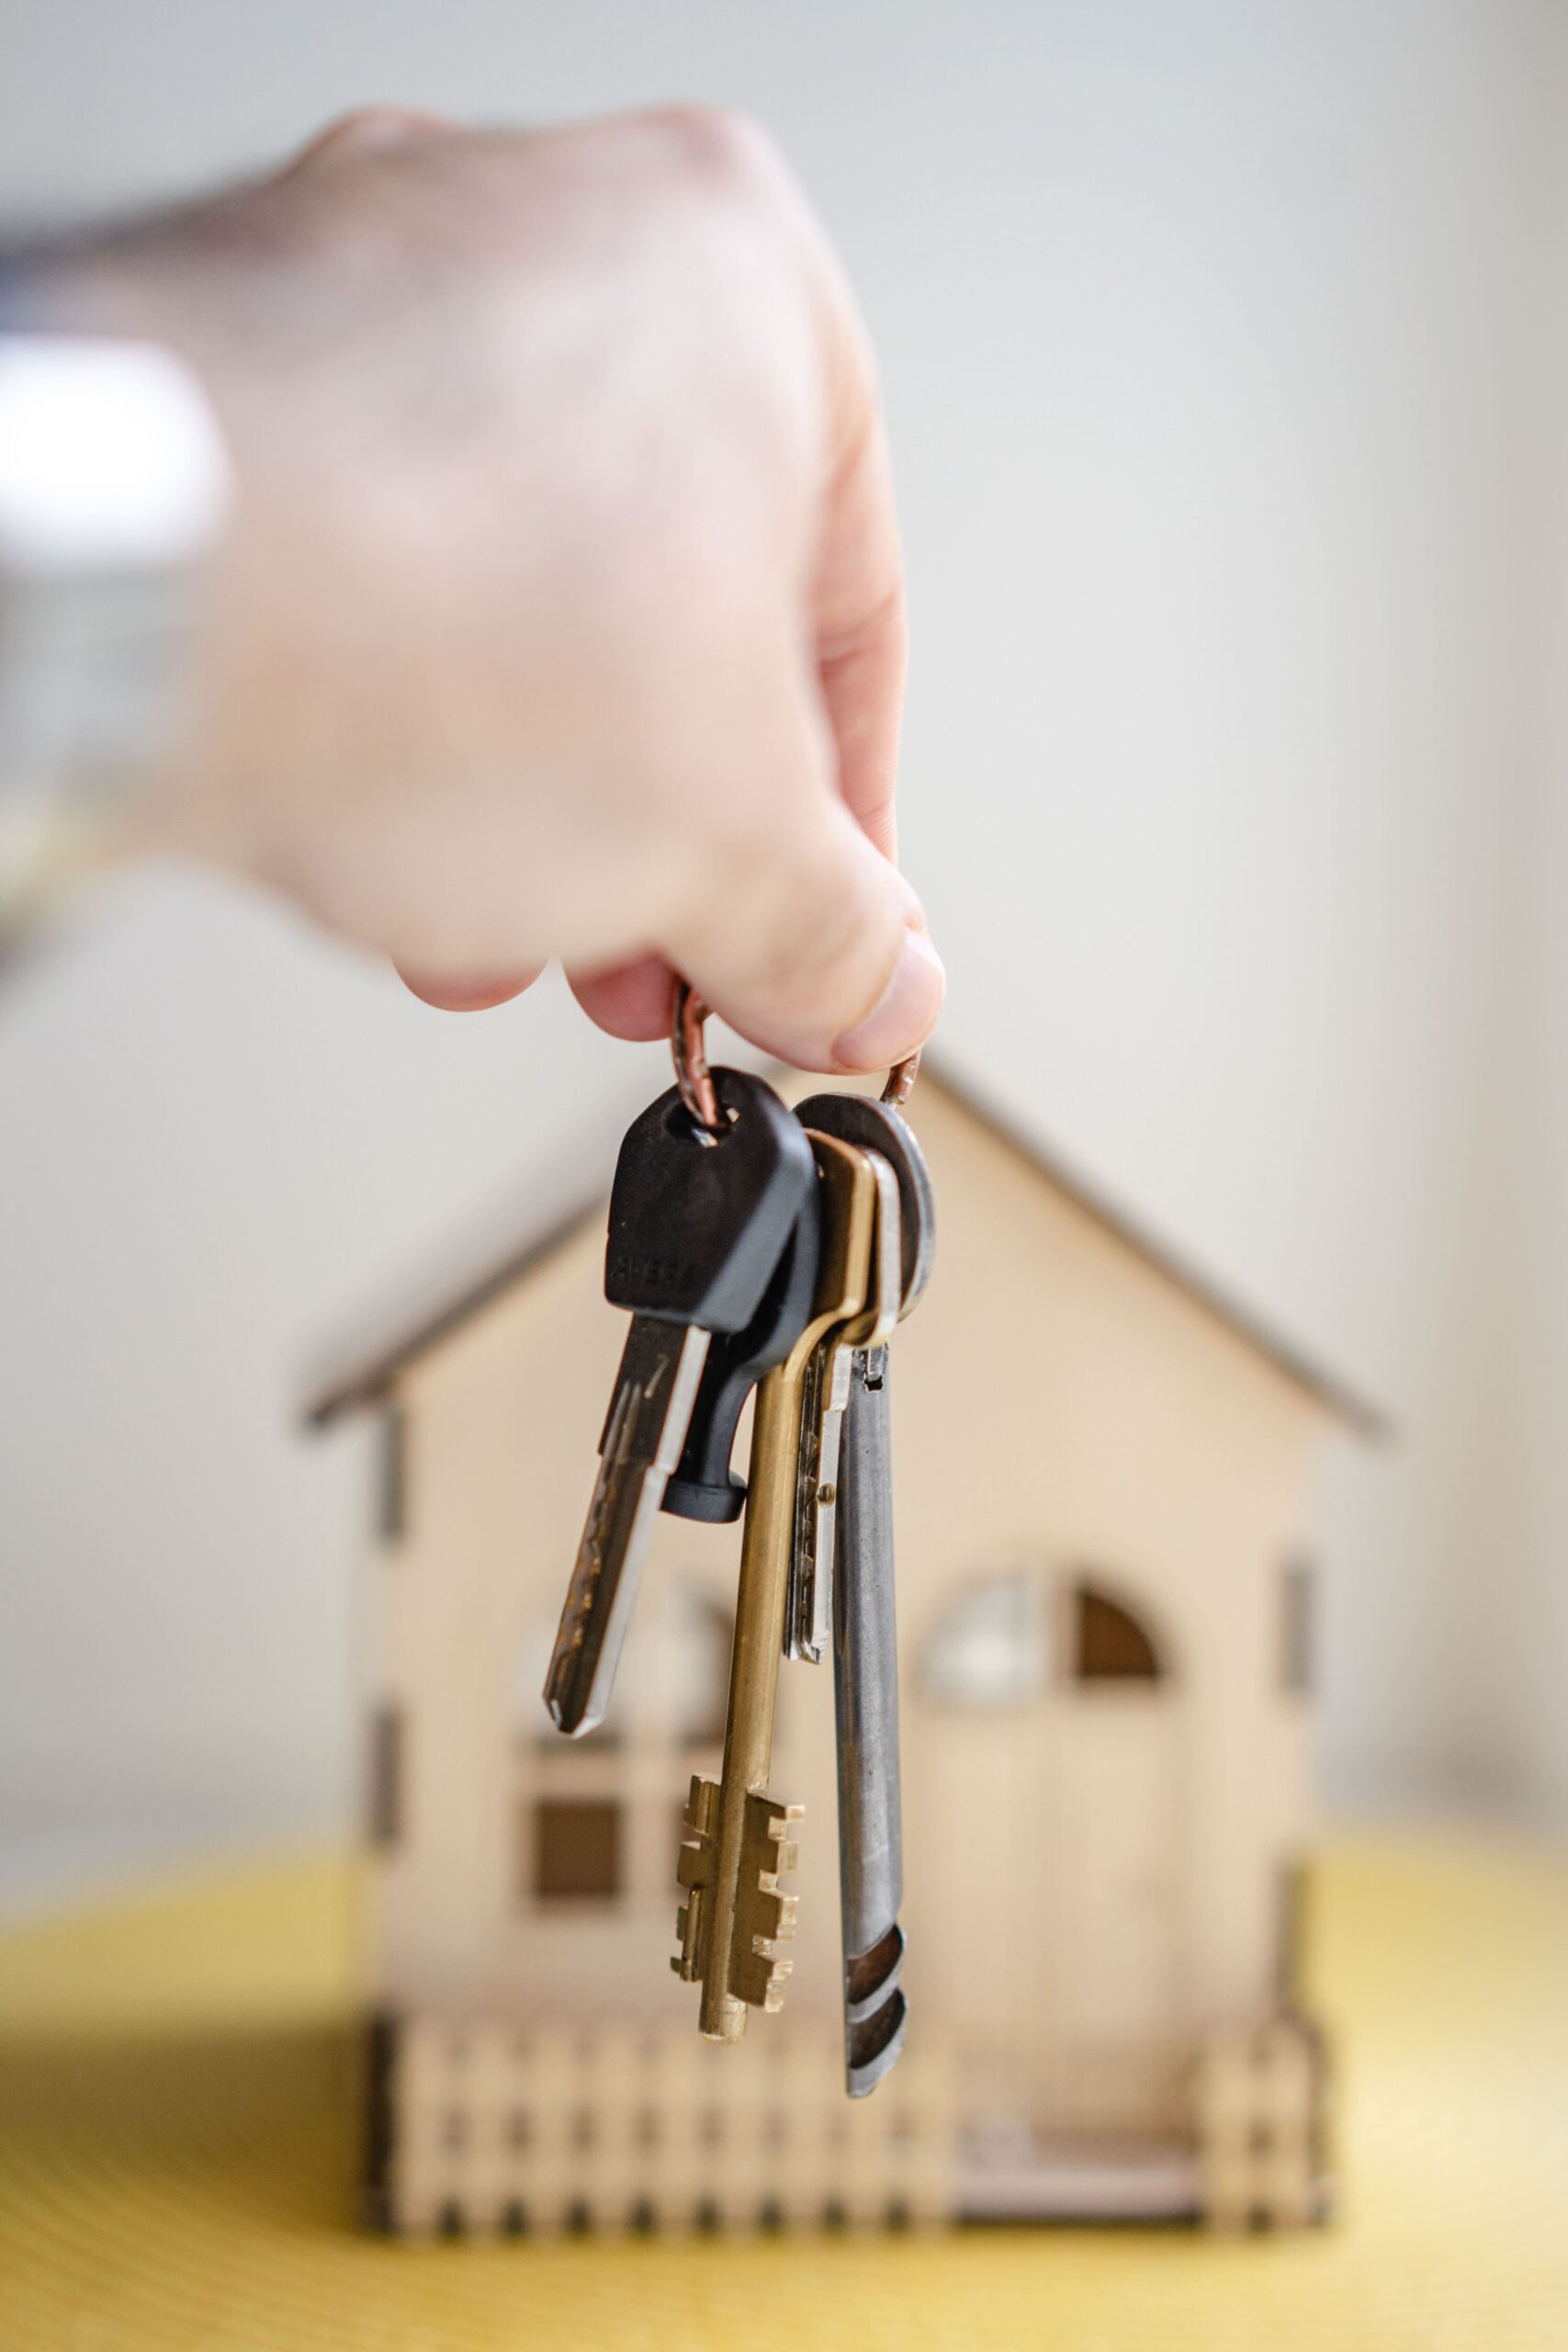 keys for new home bought using an FHA loan